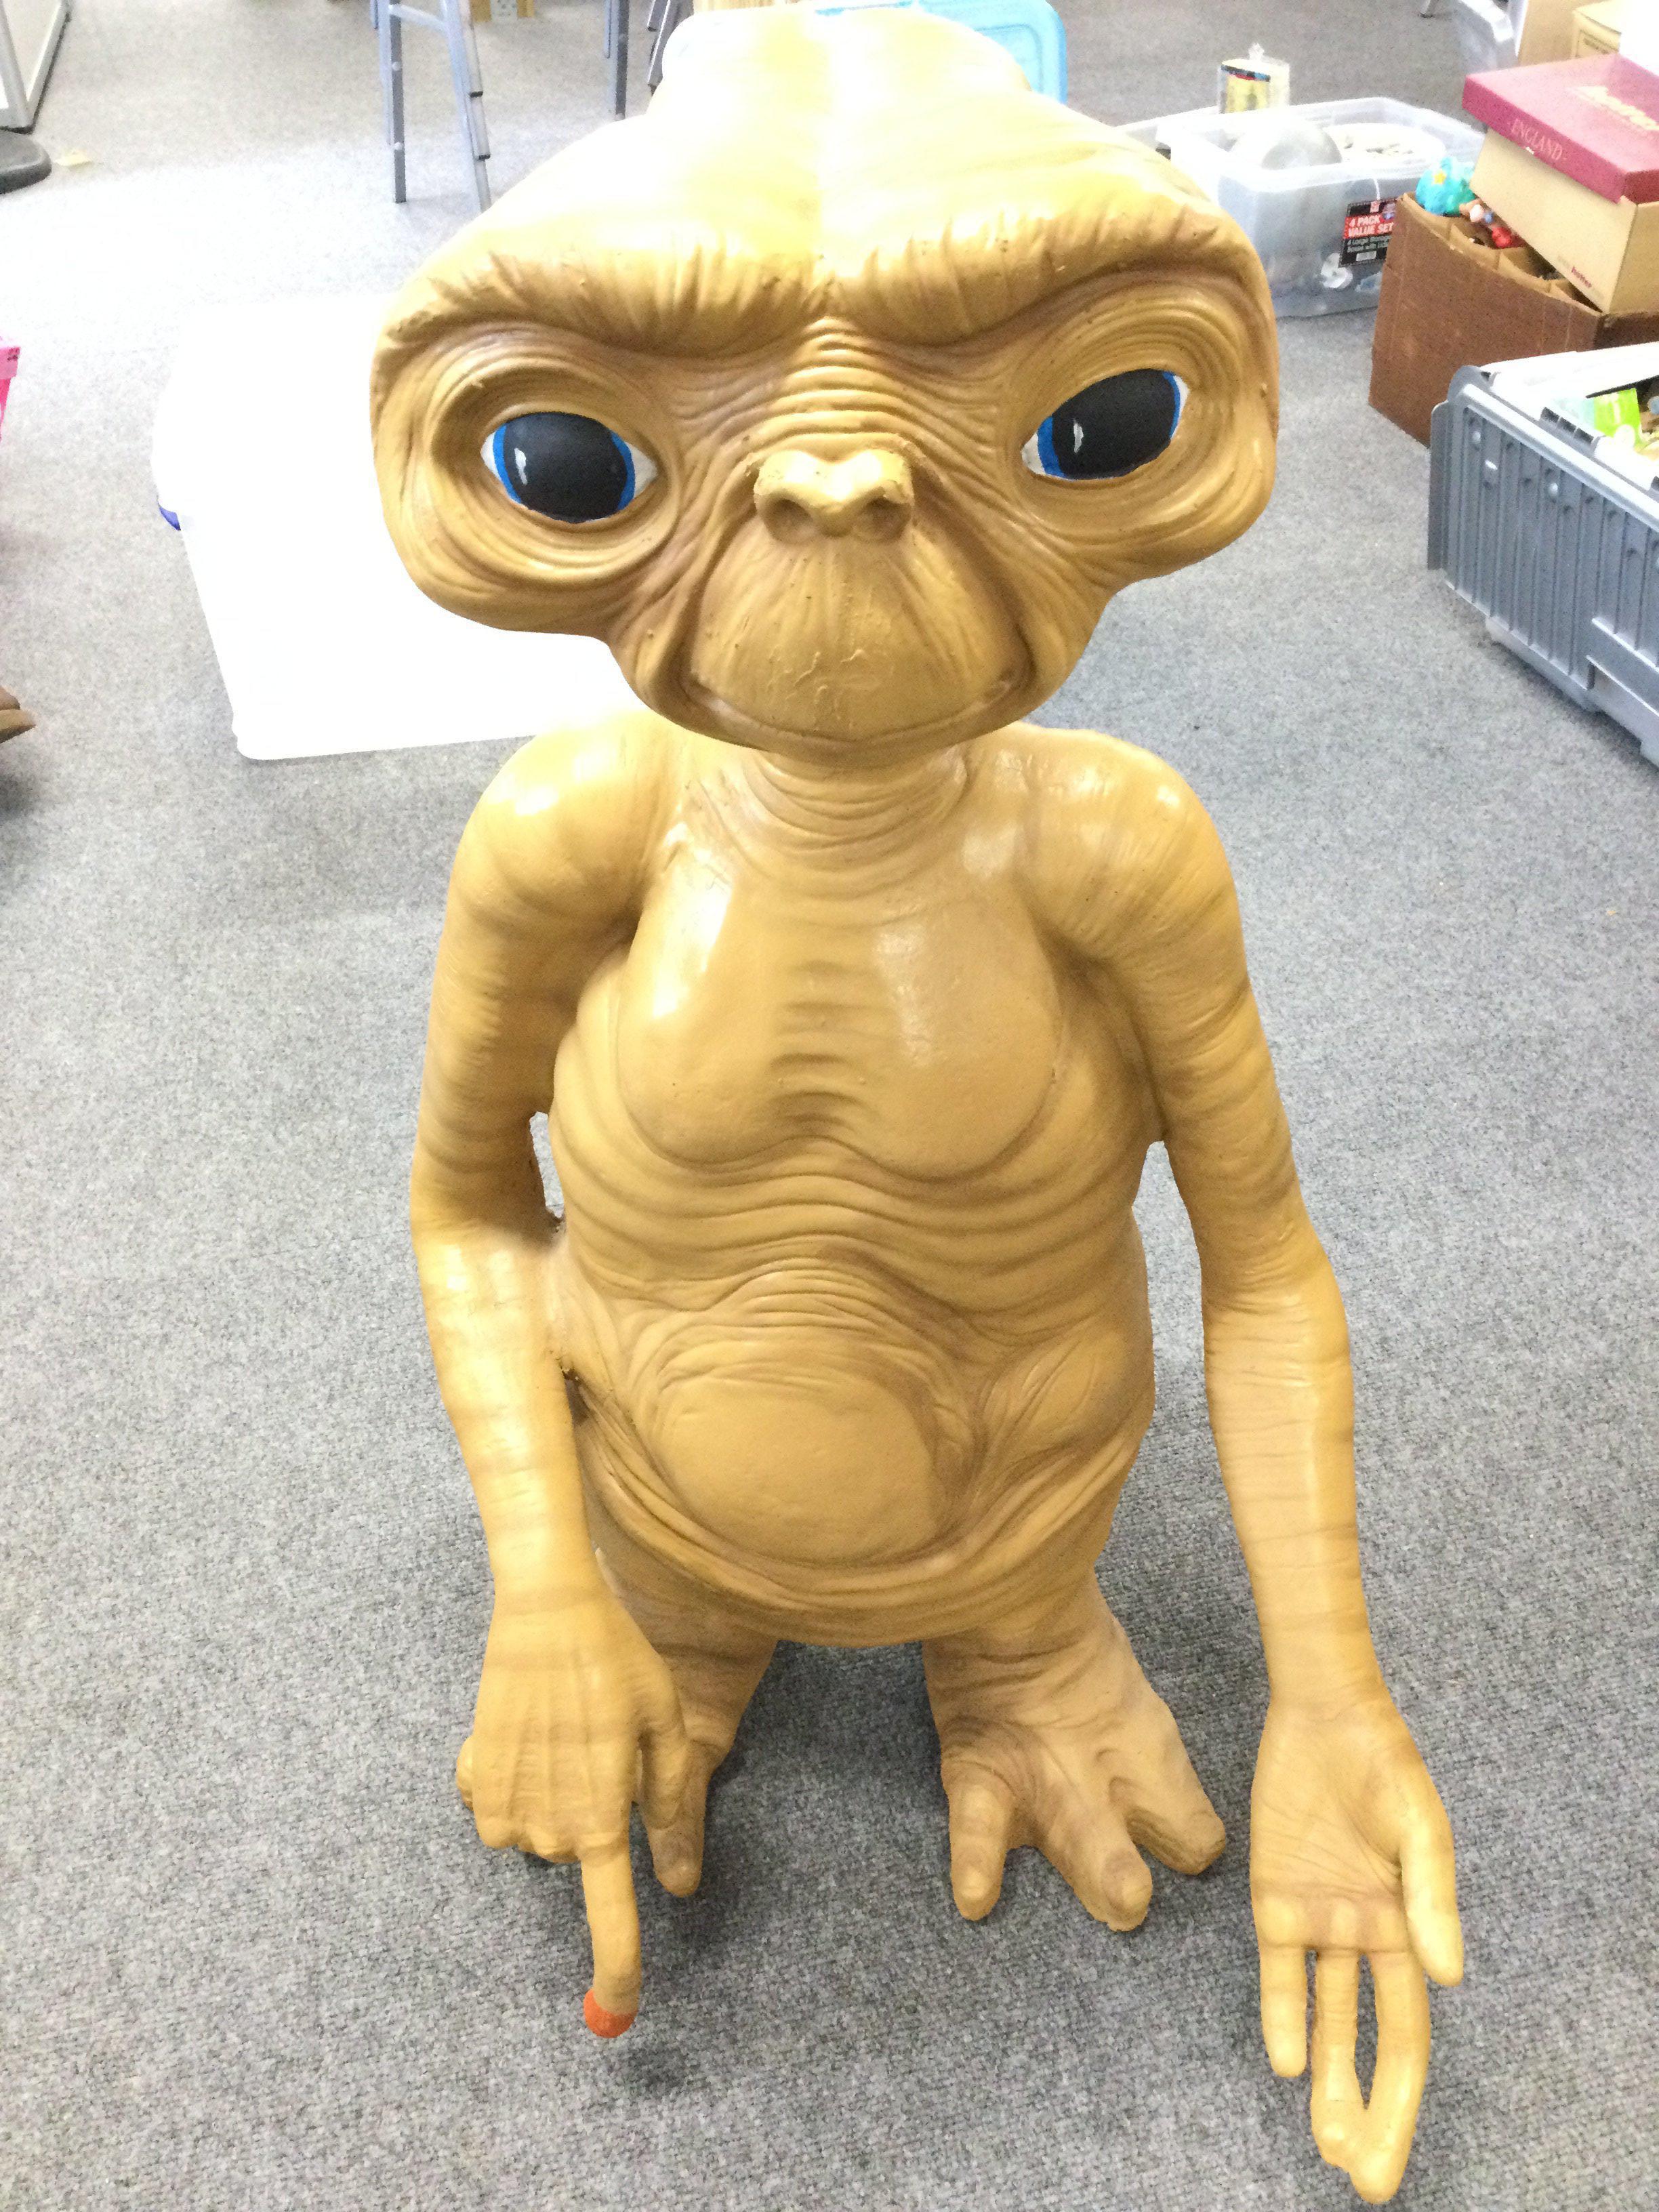 A Large Fibre Glass Figures of E.T. Possibly a Shop Display approx Height 87 Cm.